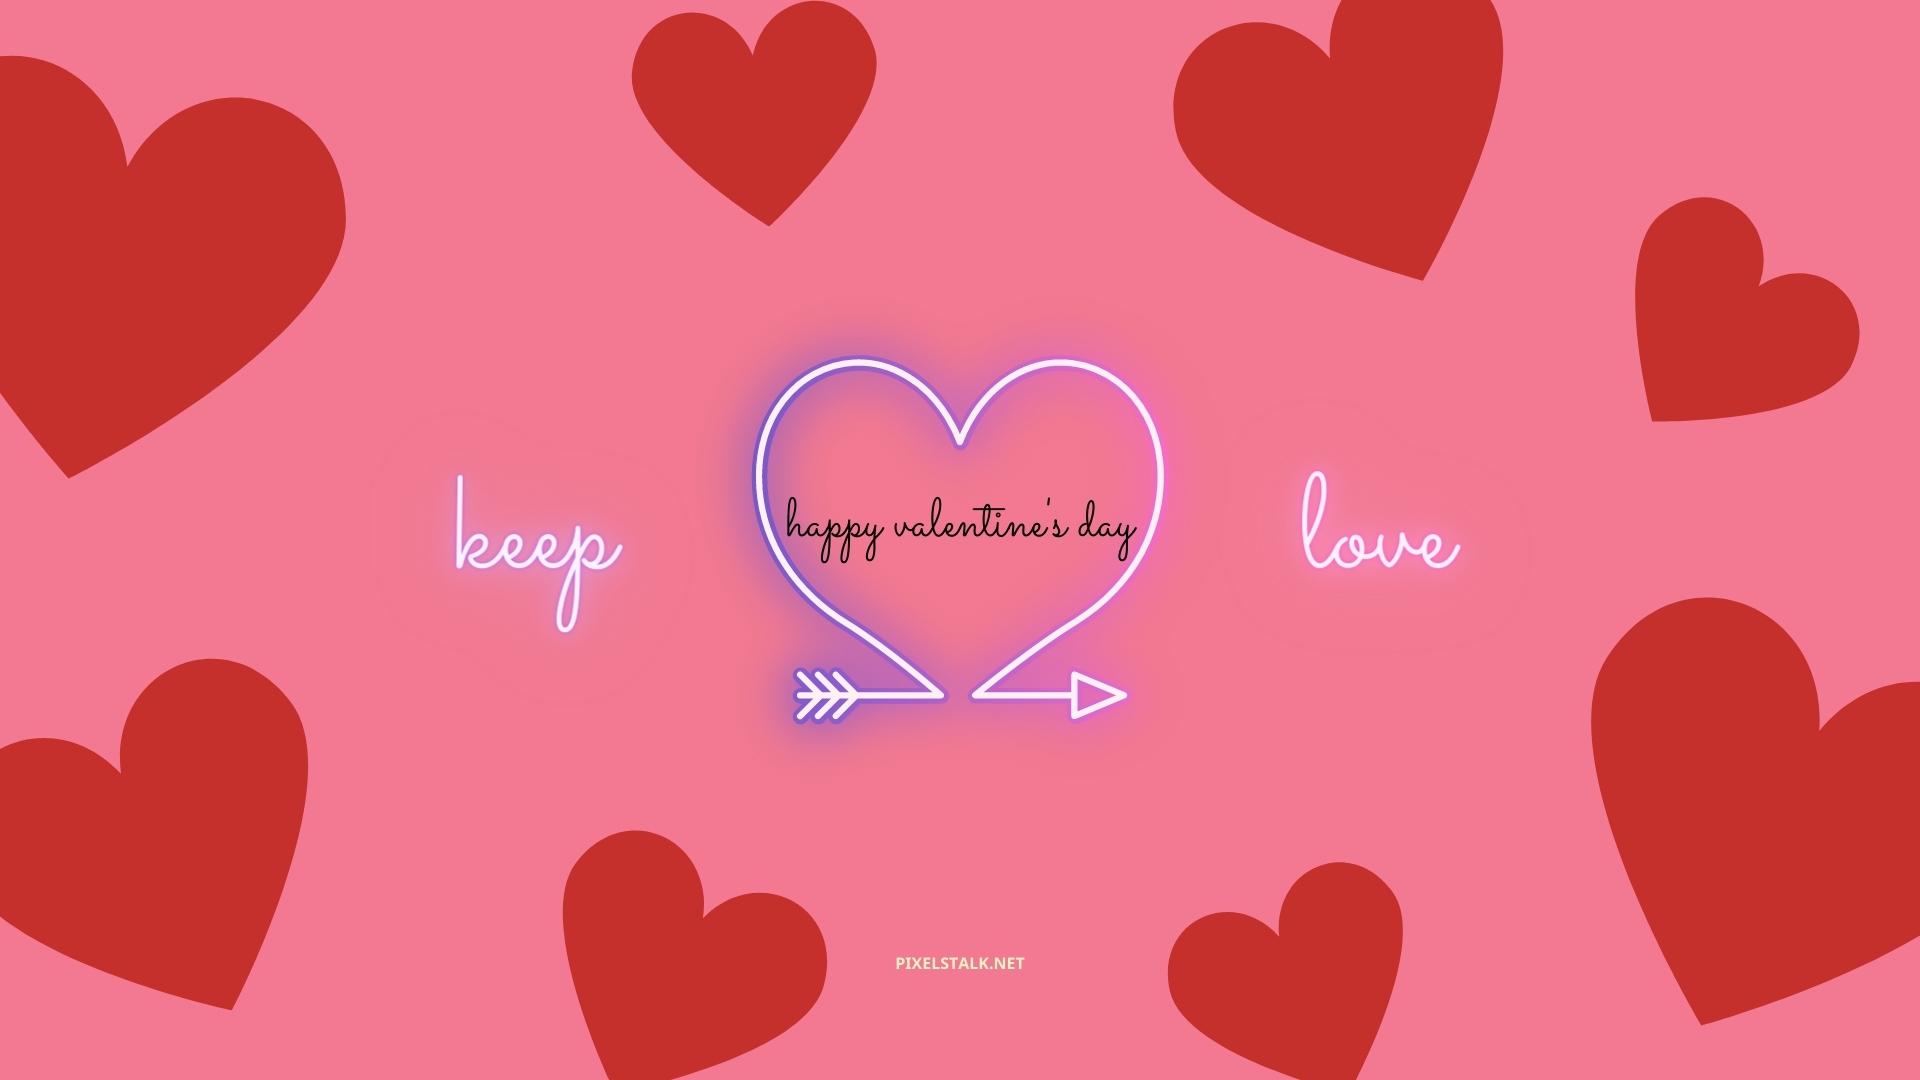 33 Free Valentines Day Wallpapers and Backgrounds  Picsart Blog